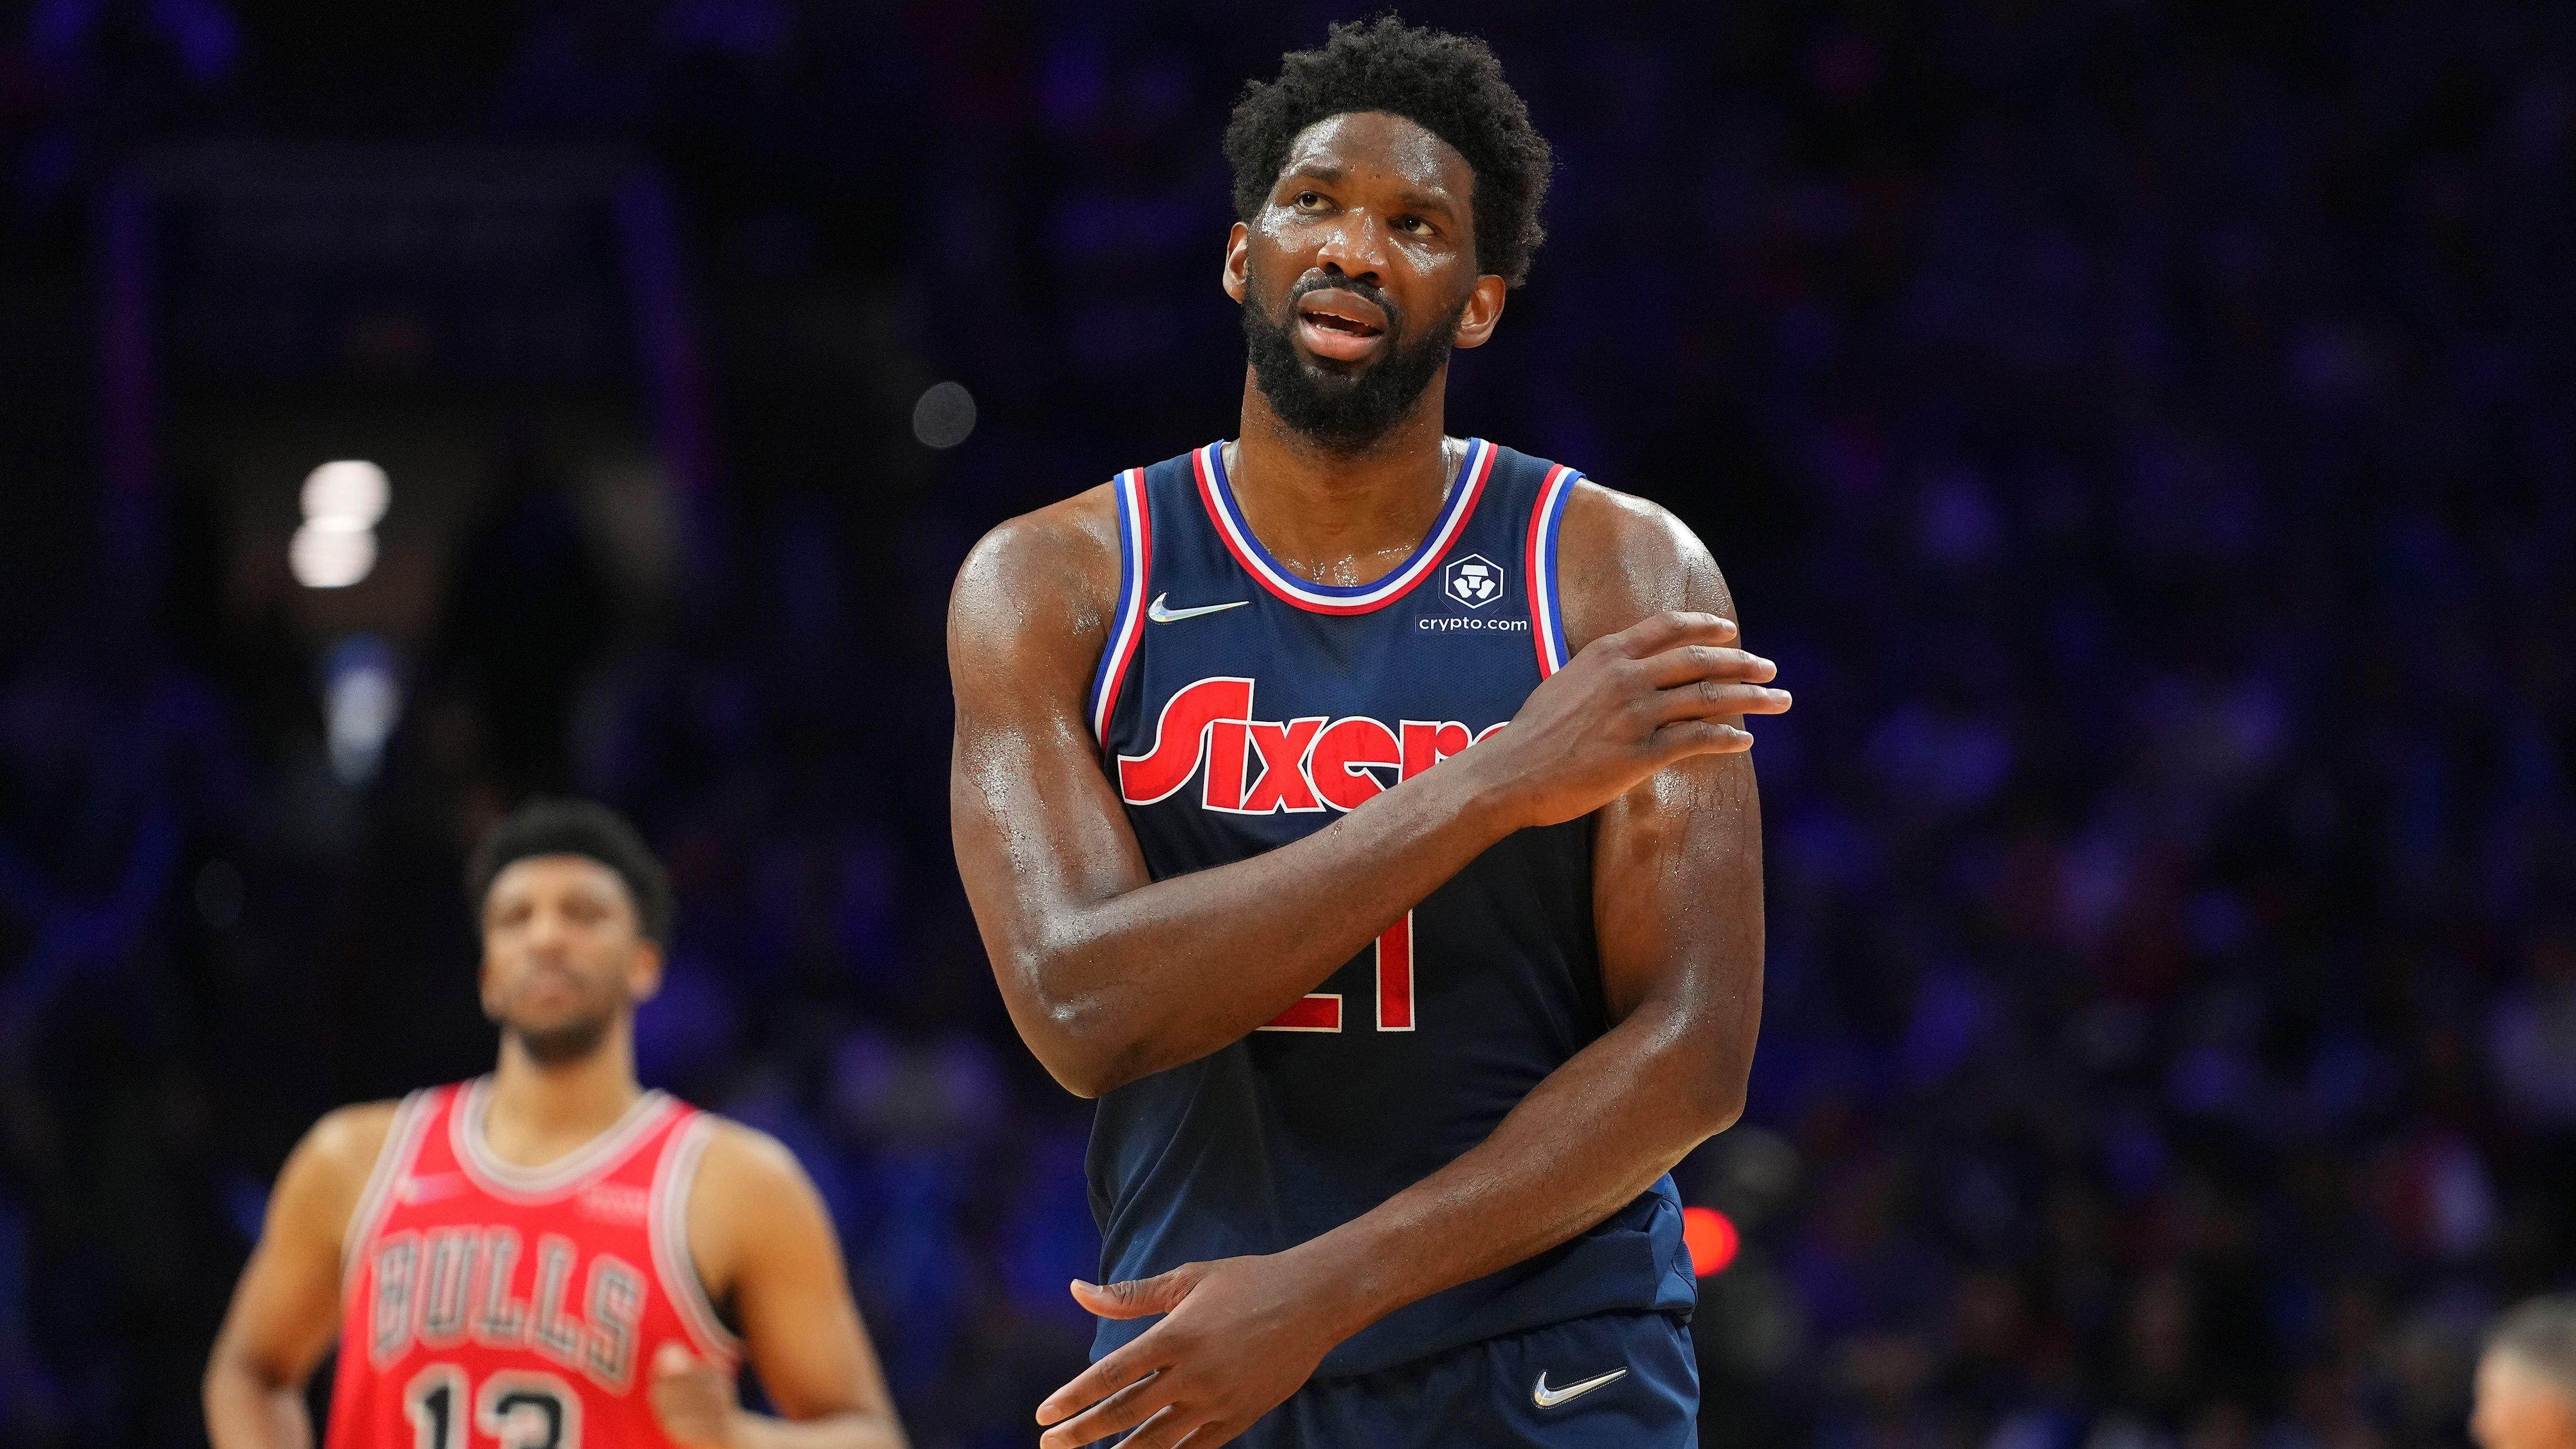 Joel Embiid watching the replay